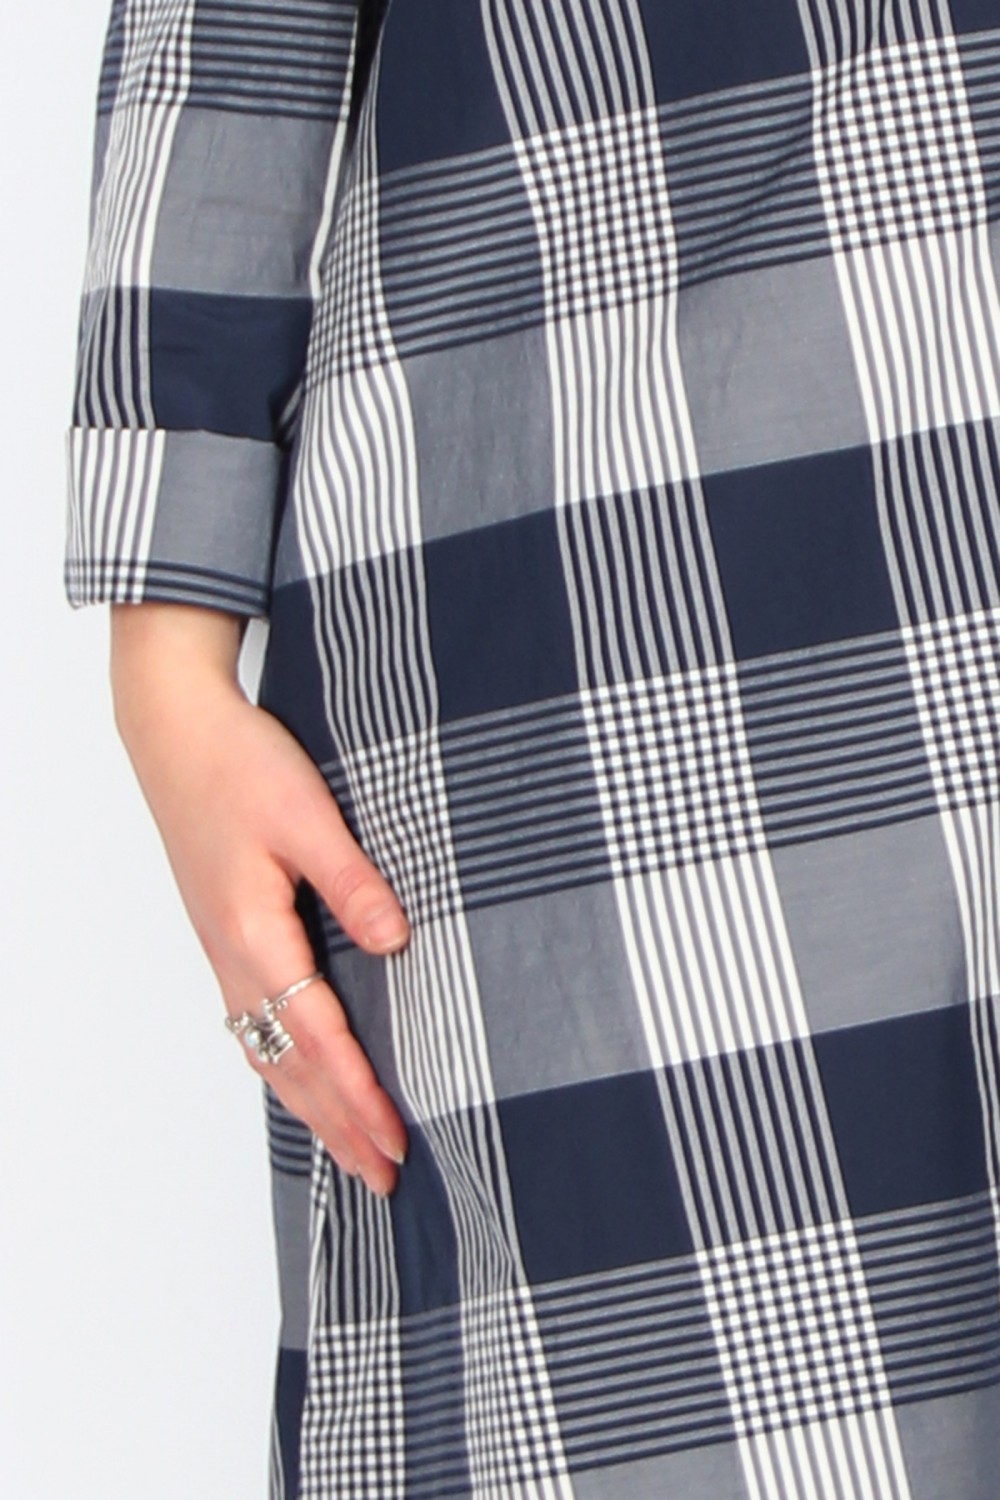 OSKA Dress 431 Night / Cotton Blend with Gingham Check